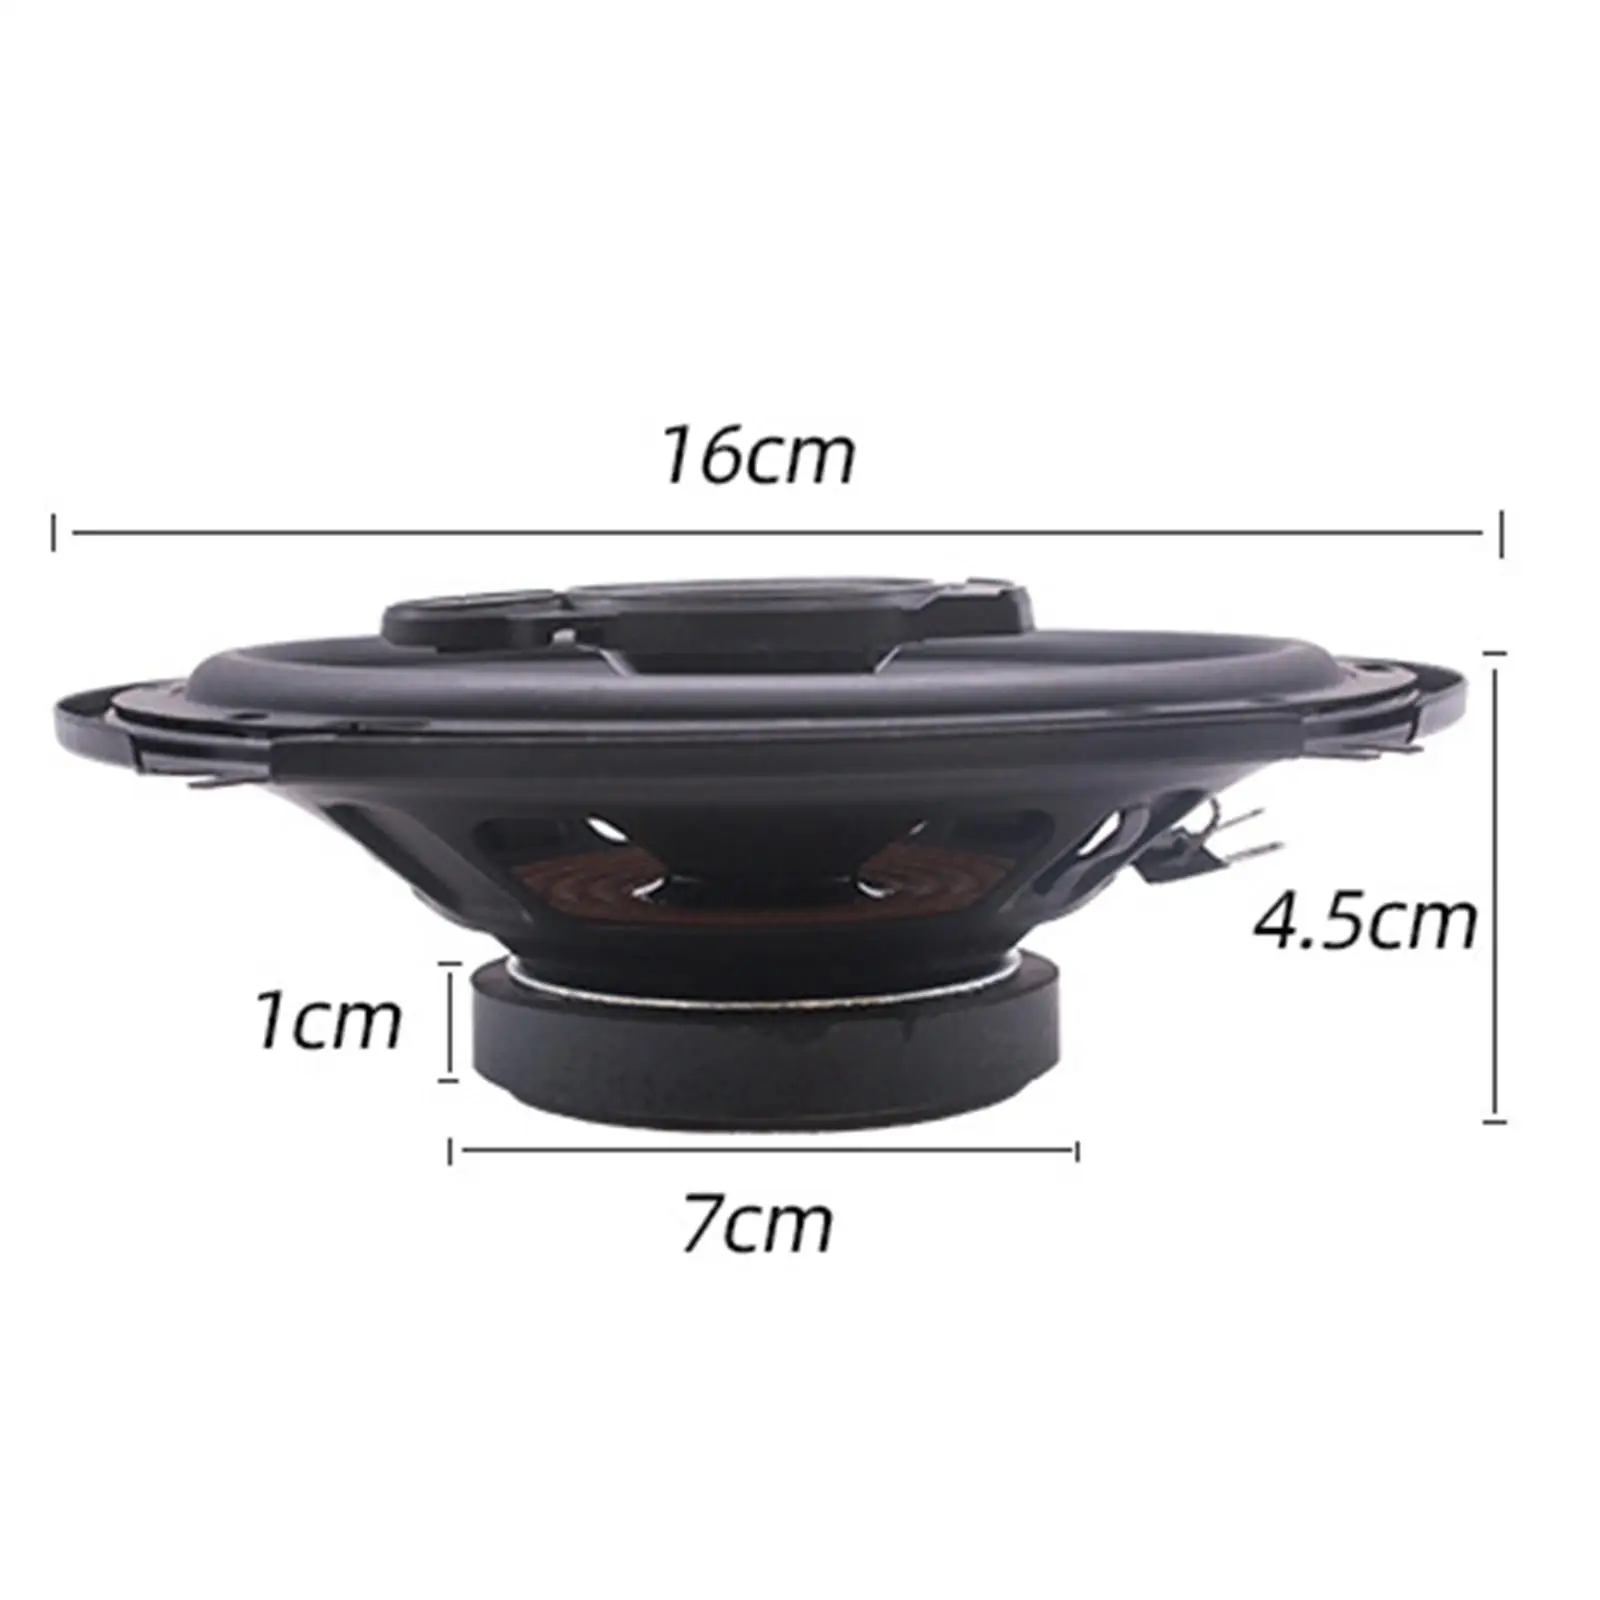 Coaxial Speaker Compact Durable for Car Audio System Replaces Accessory